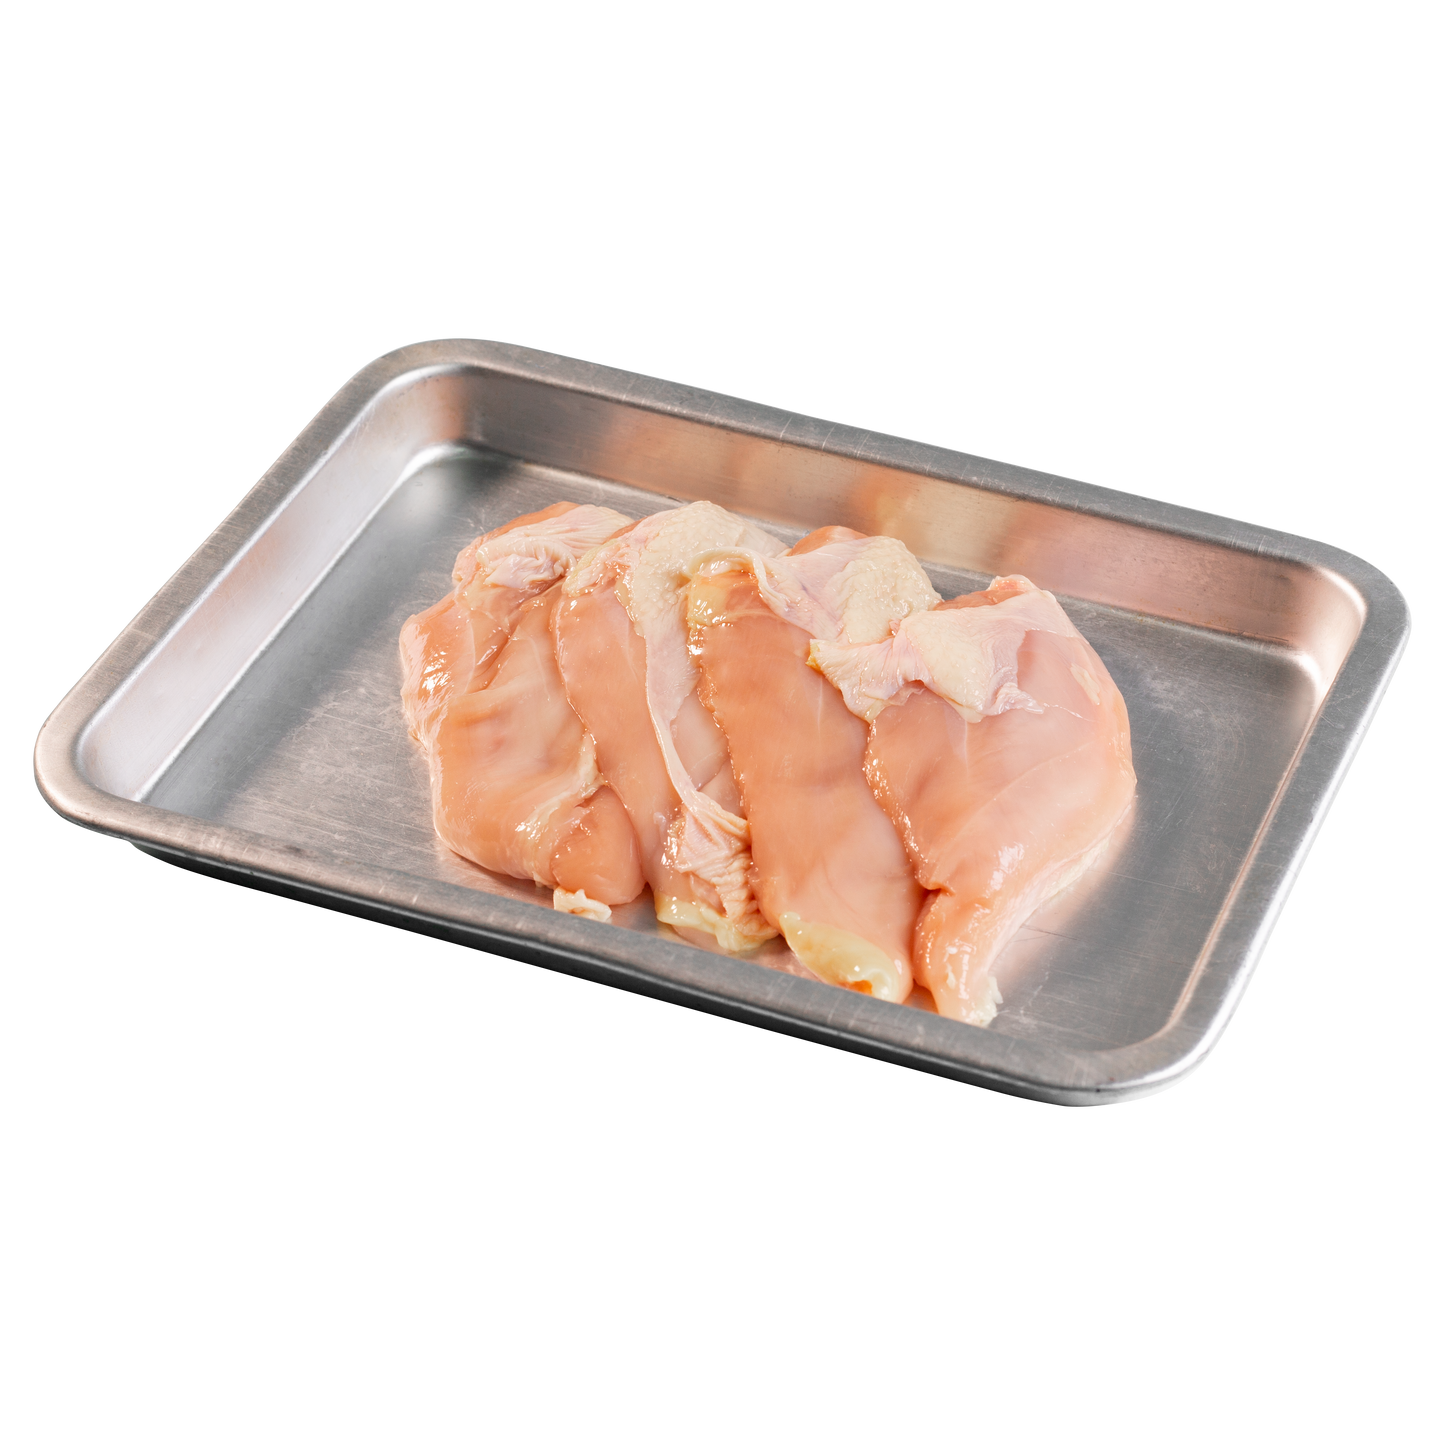 GG™ Poulet Breast